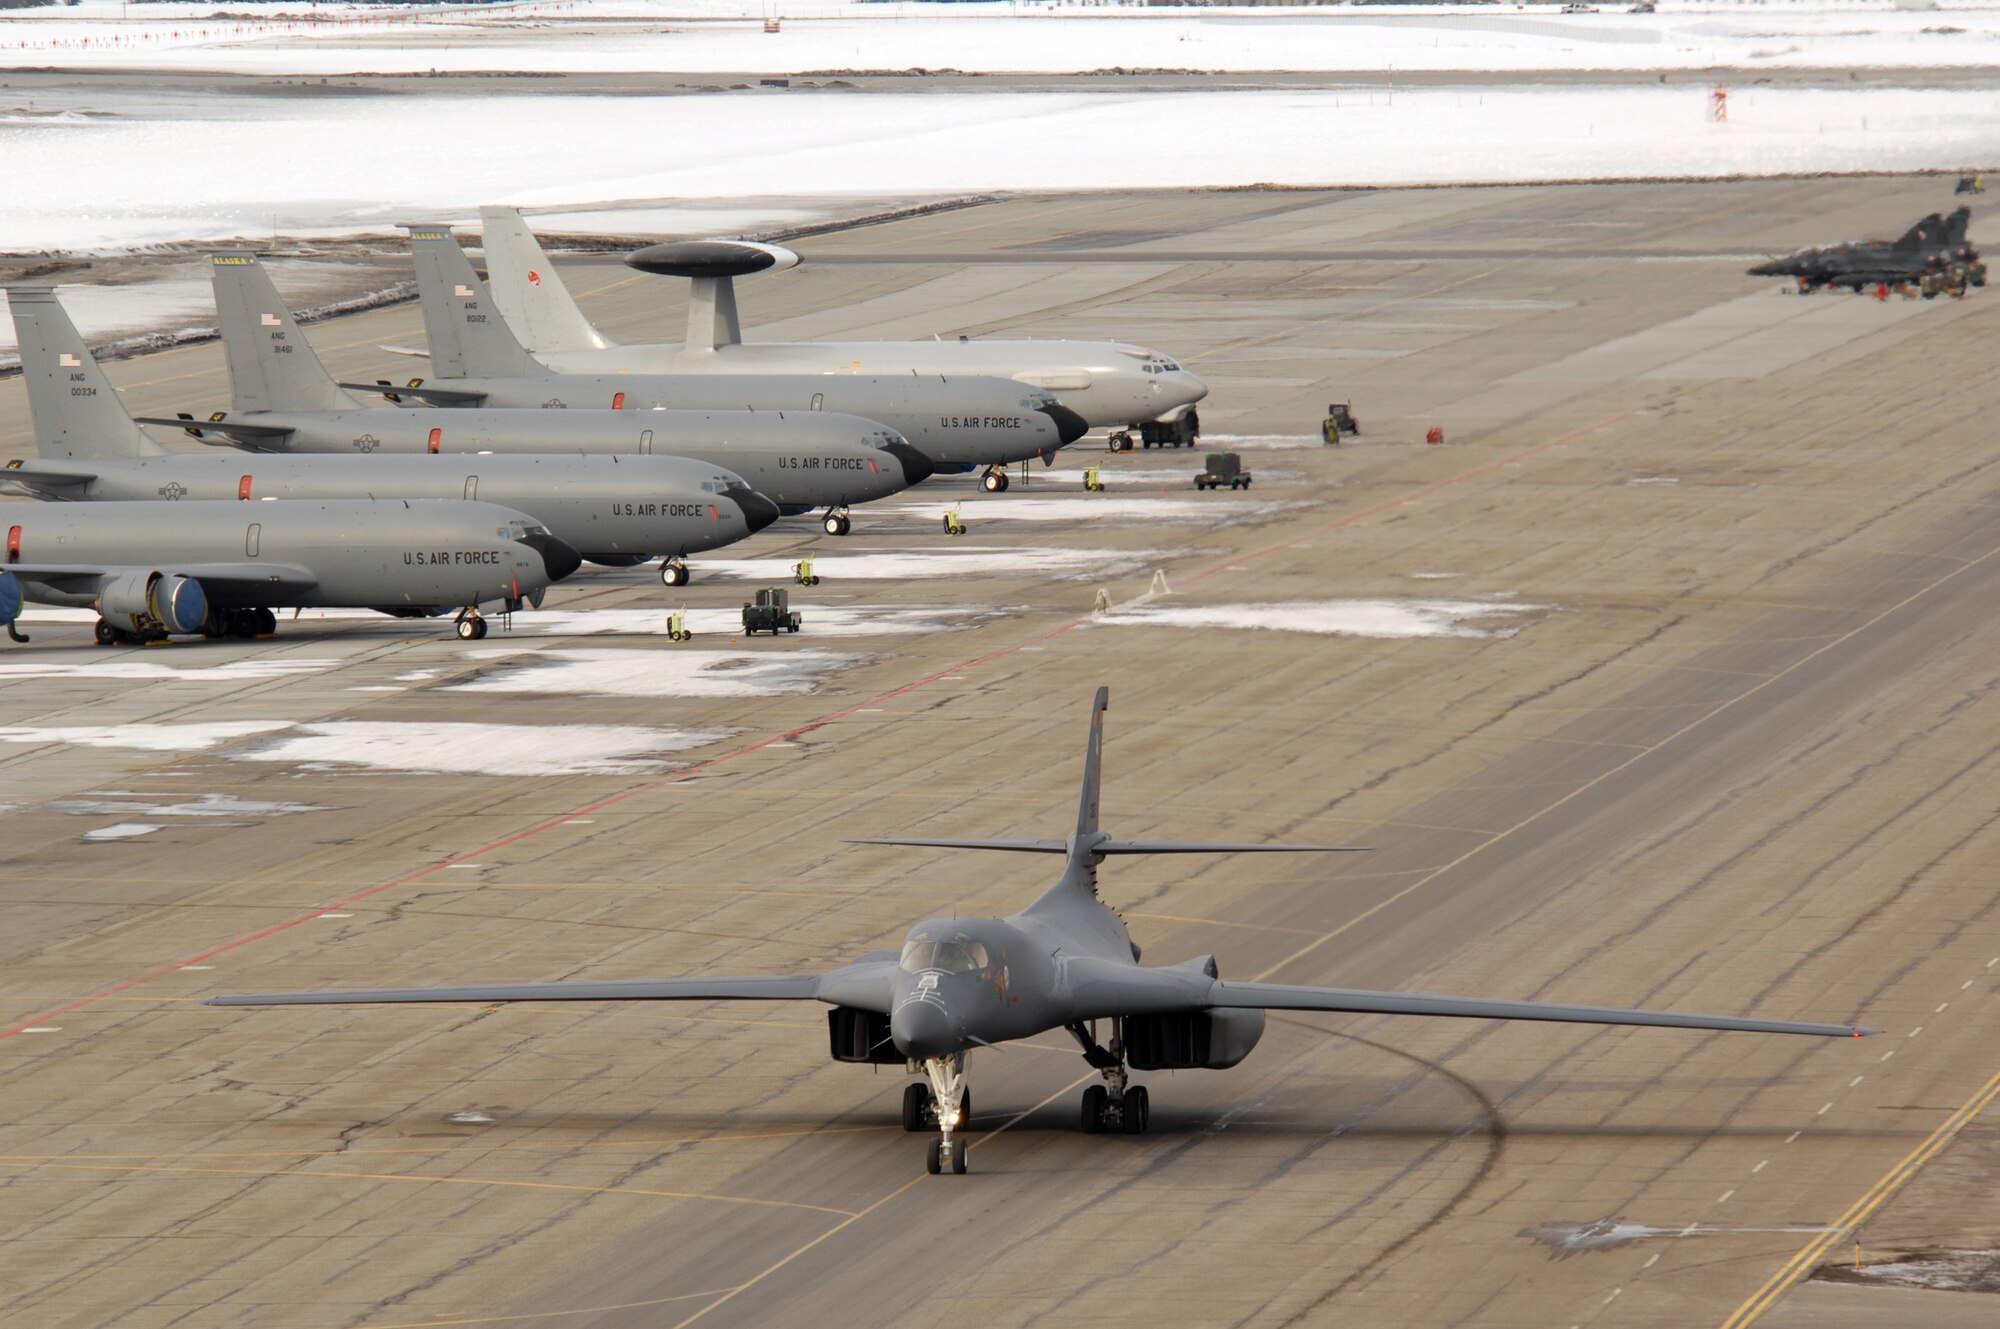 EIELSON AIR FORCE BASE, Alaska -- A B-1B Lancer from Ellsworth Air Force Base, South Dakota, taxi on the flightline here on April  3 for Red Flag-Alaska 07-1. Red Flag-Alaska allows aircrews to practice large-scale combat missions. The exercises are conducted on the Pacific Alaskan Range Complex with air operations flown out of Eielson and Elmendorf Air Force bases. (U.S. Air Force Photo by Staff Sgt Joshua Strang)